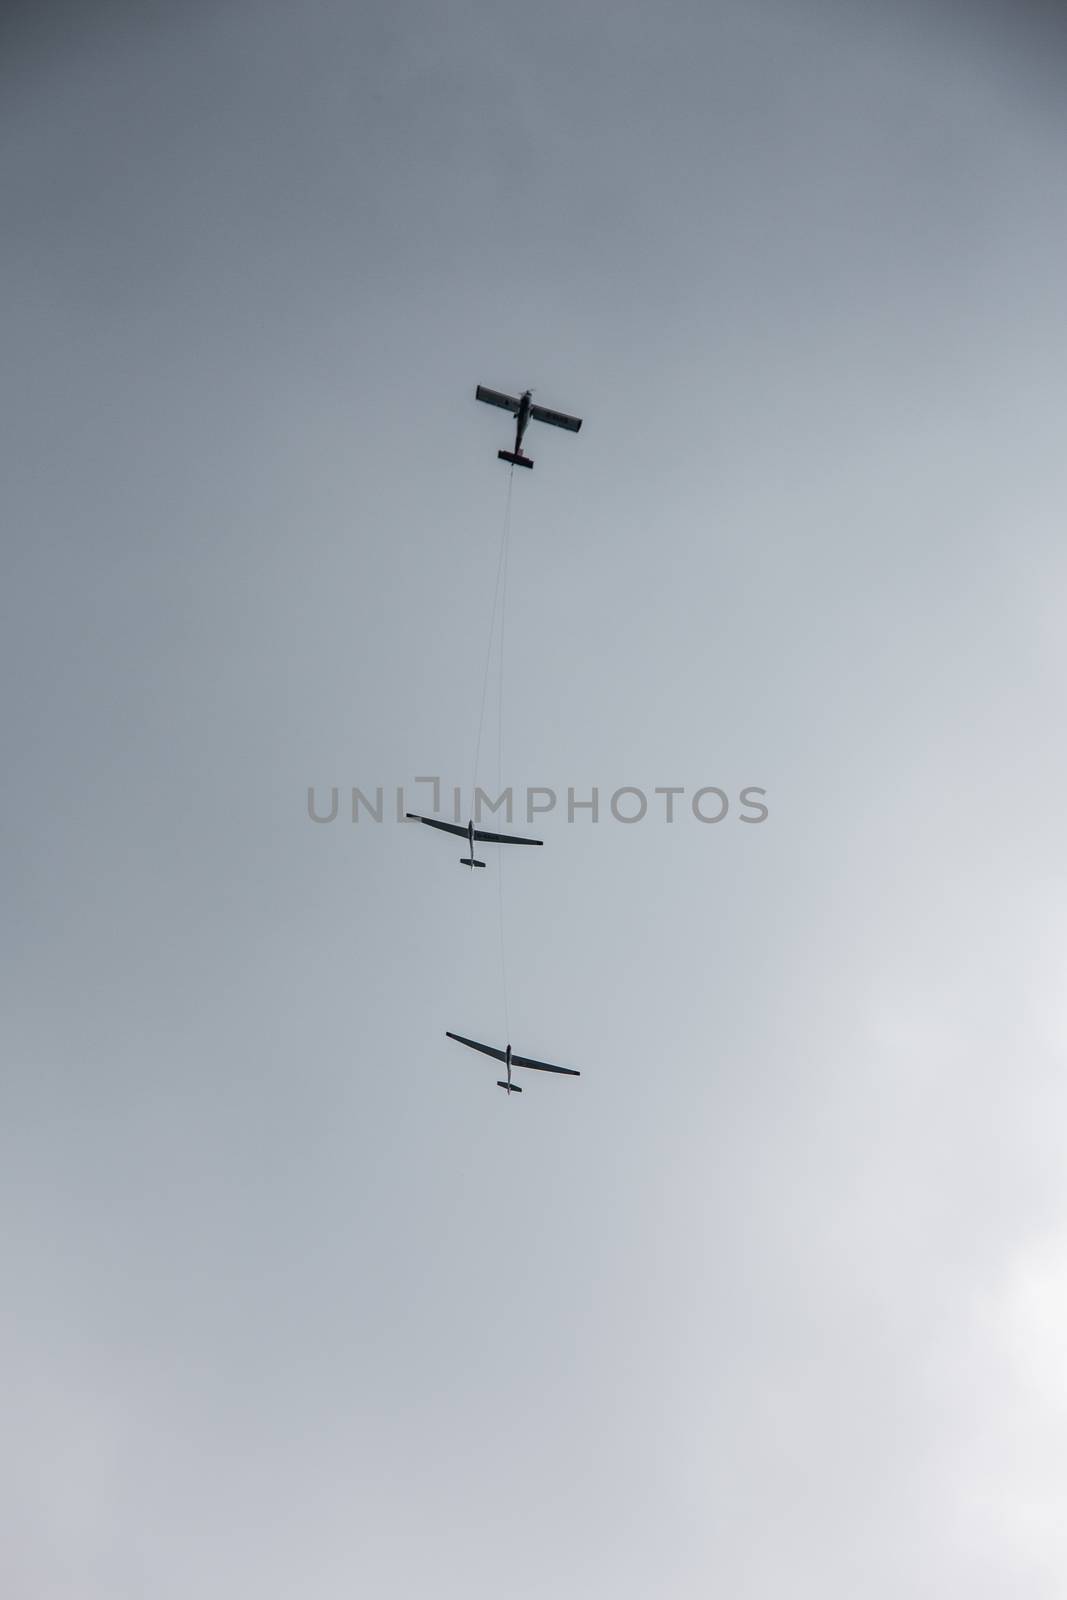 Motor pilot drags two glider pilots into the air